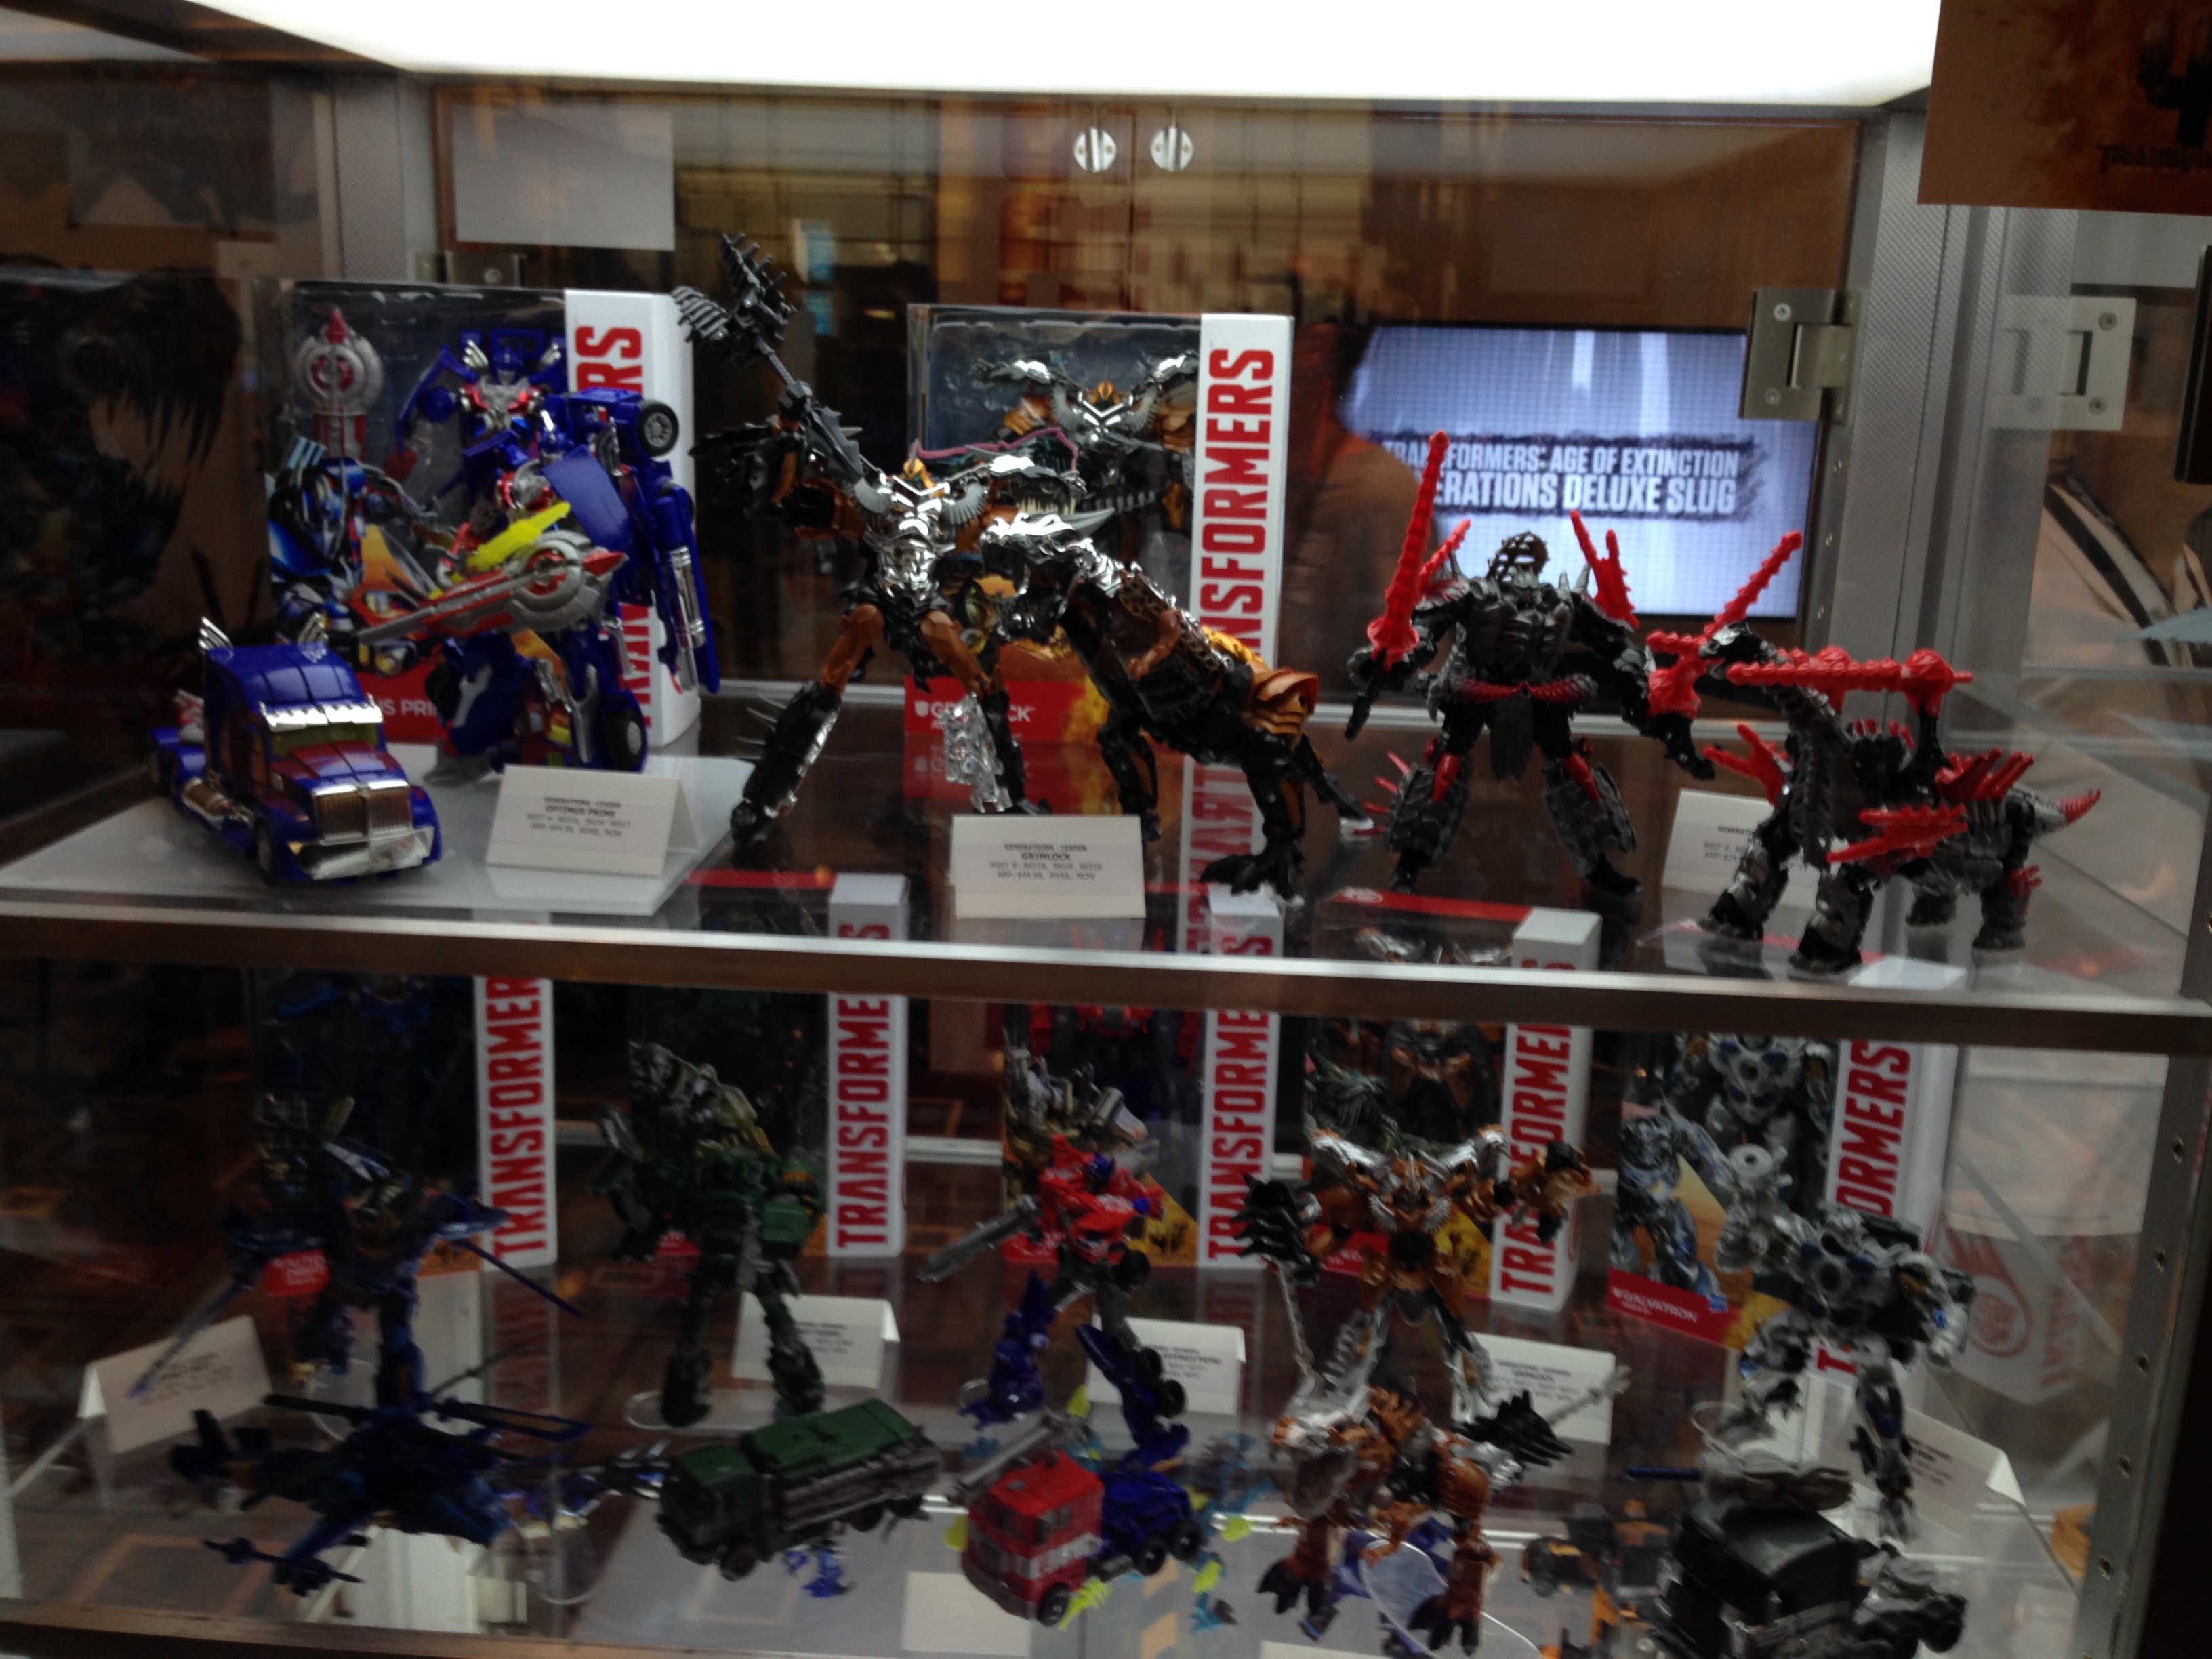 Age of Extinction toys. At that time, the movie wasn't out yet. (Botcon Day 3)